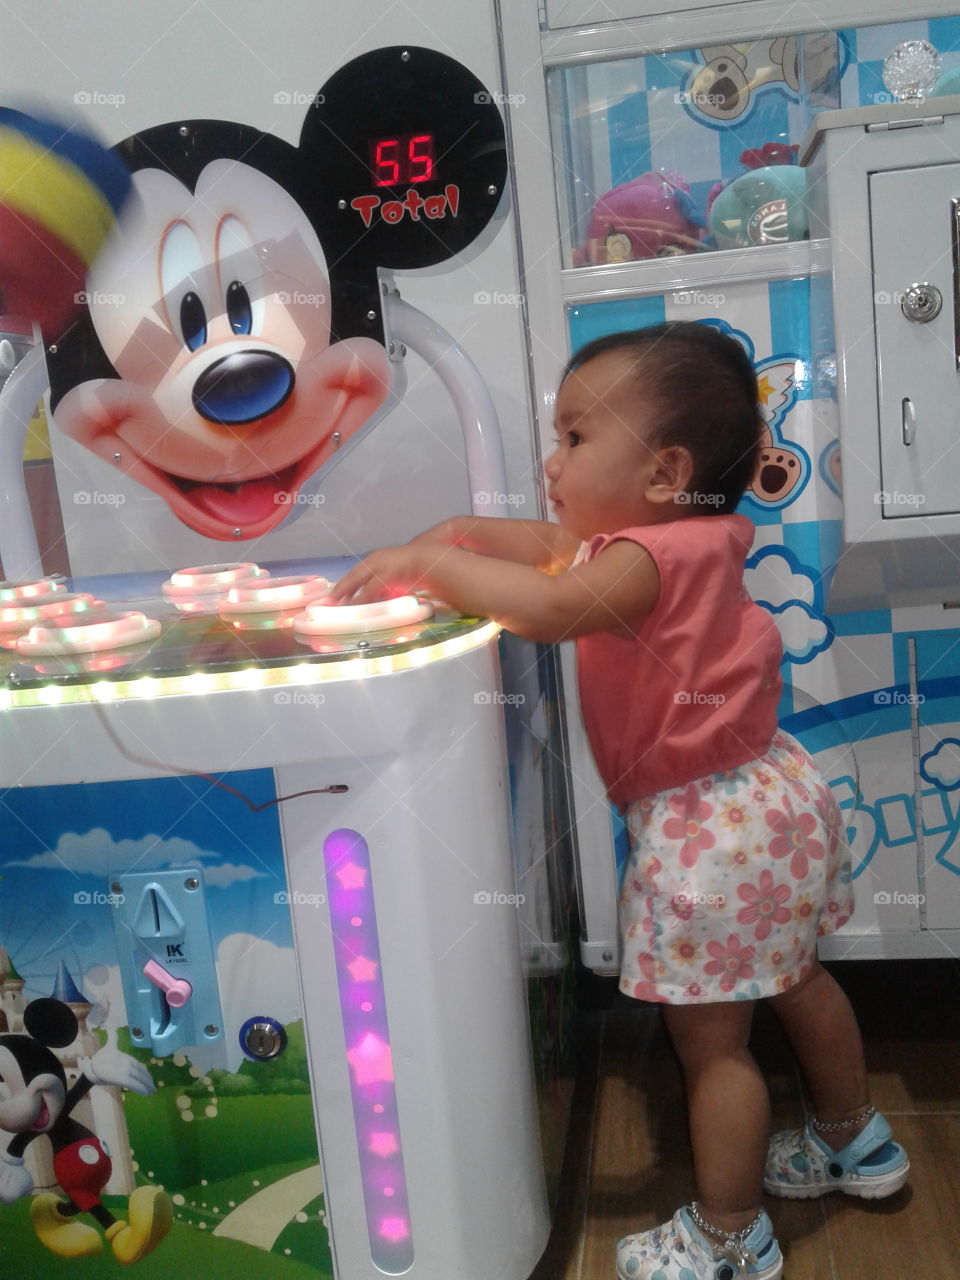 cute baby 
wants to play mickey mouse